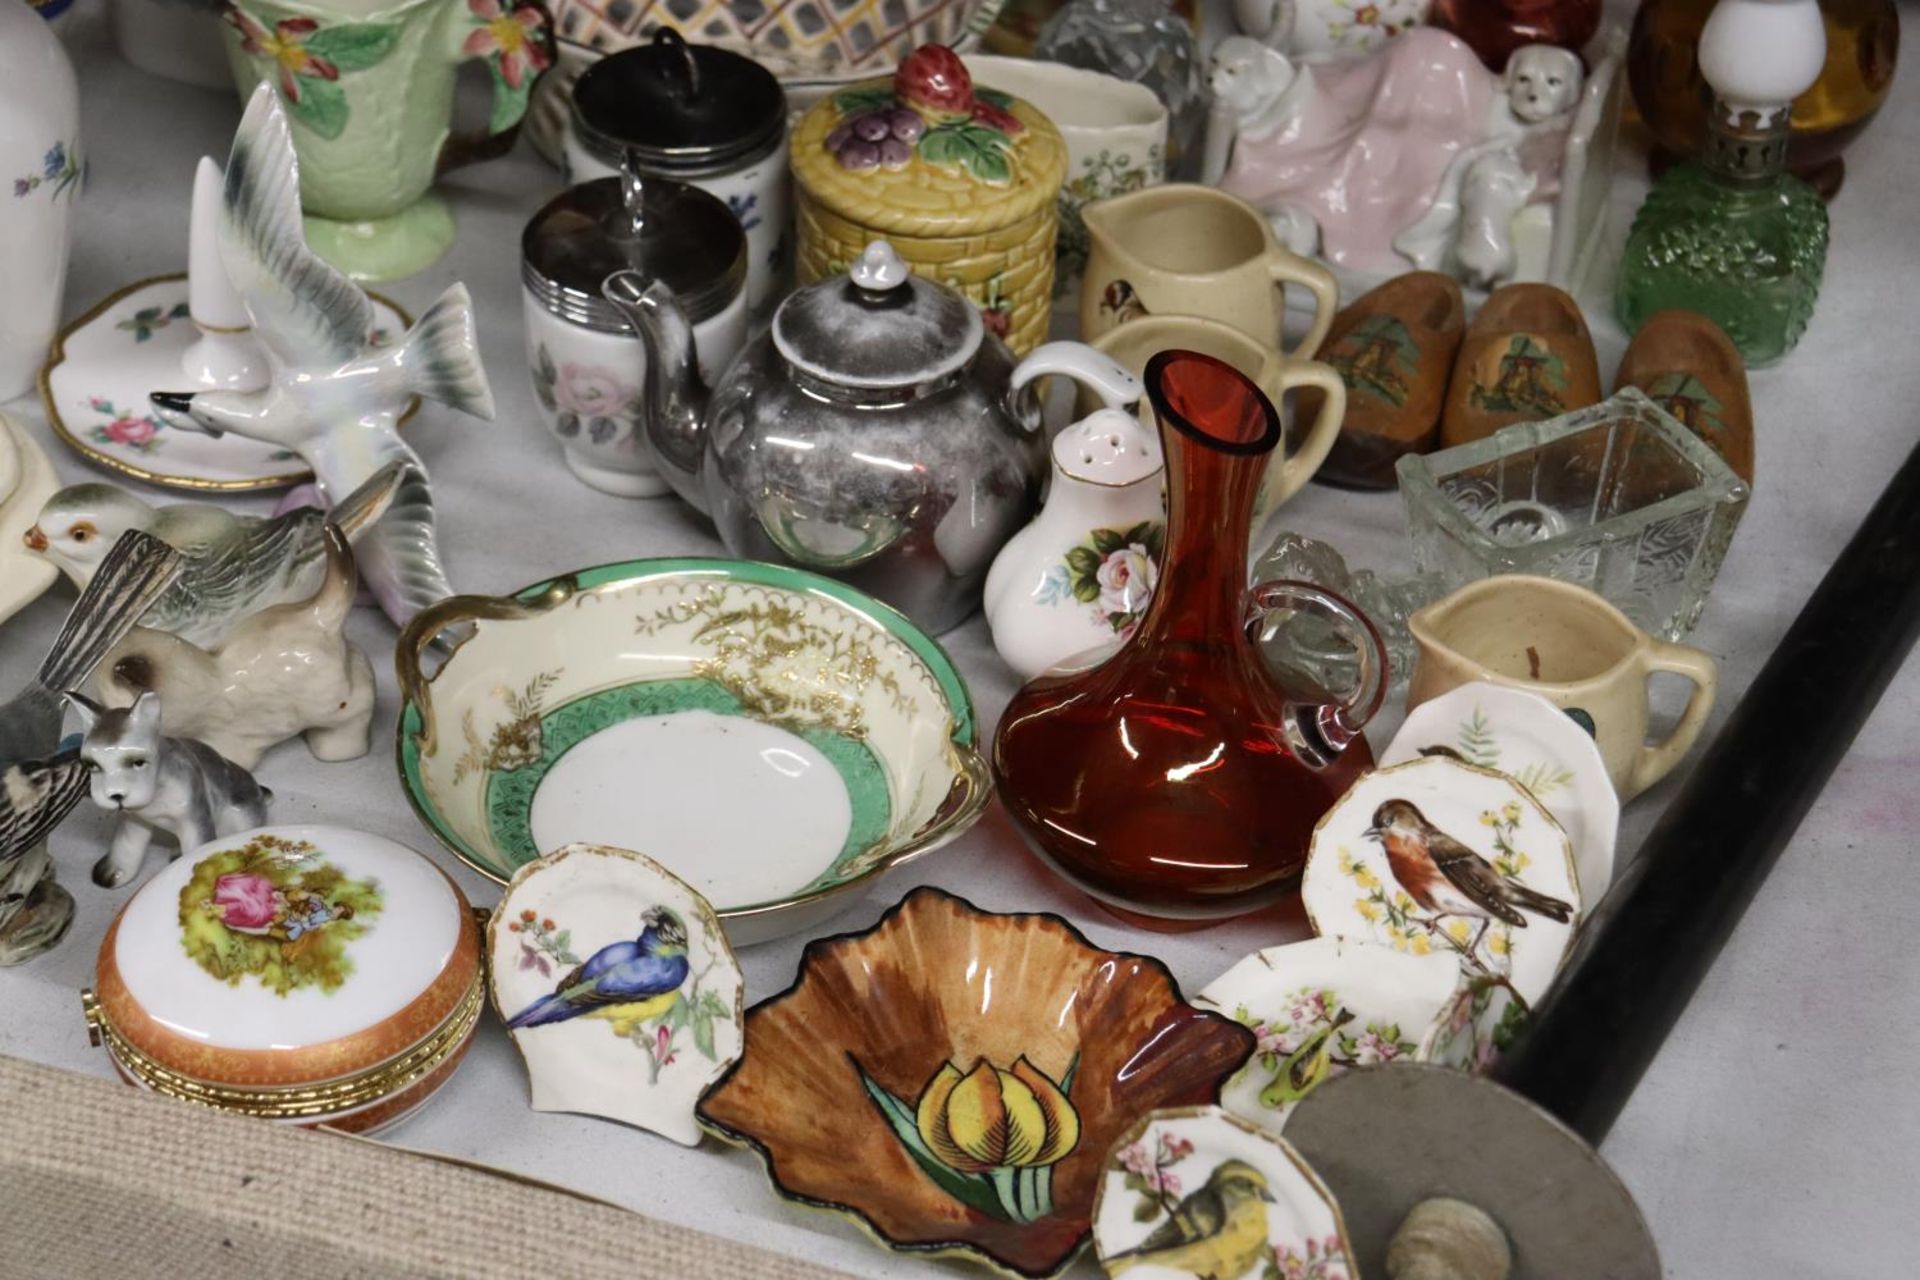 A LARGE, VINTAGE COLLECTION OF CERAMICS TO INCLUDE FIGURES, BIRDS, JUGS, BOWLS, SMALL PLATES, ETC - Image 4 of 6